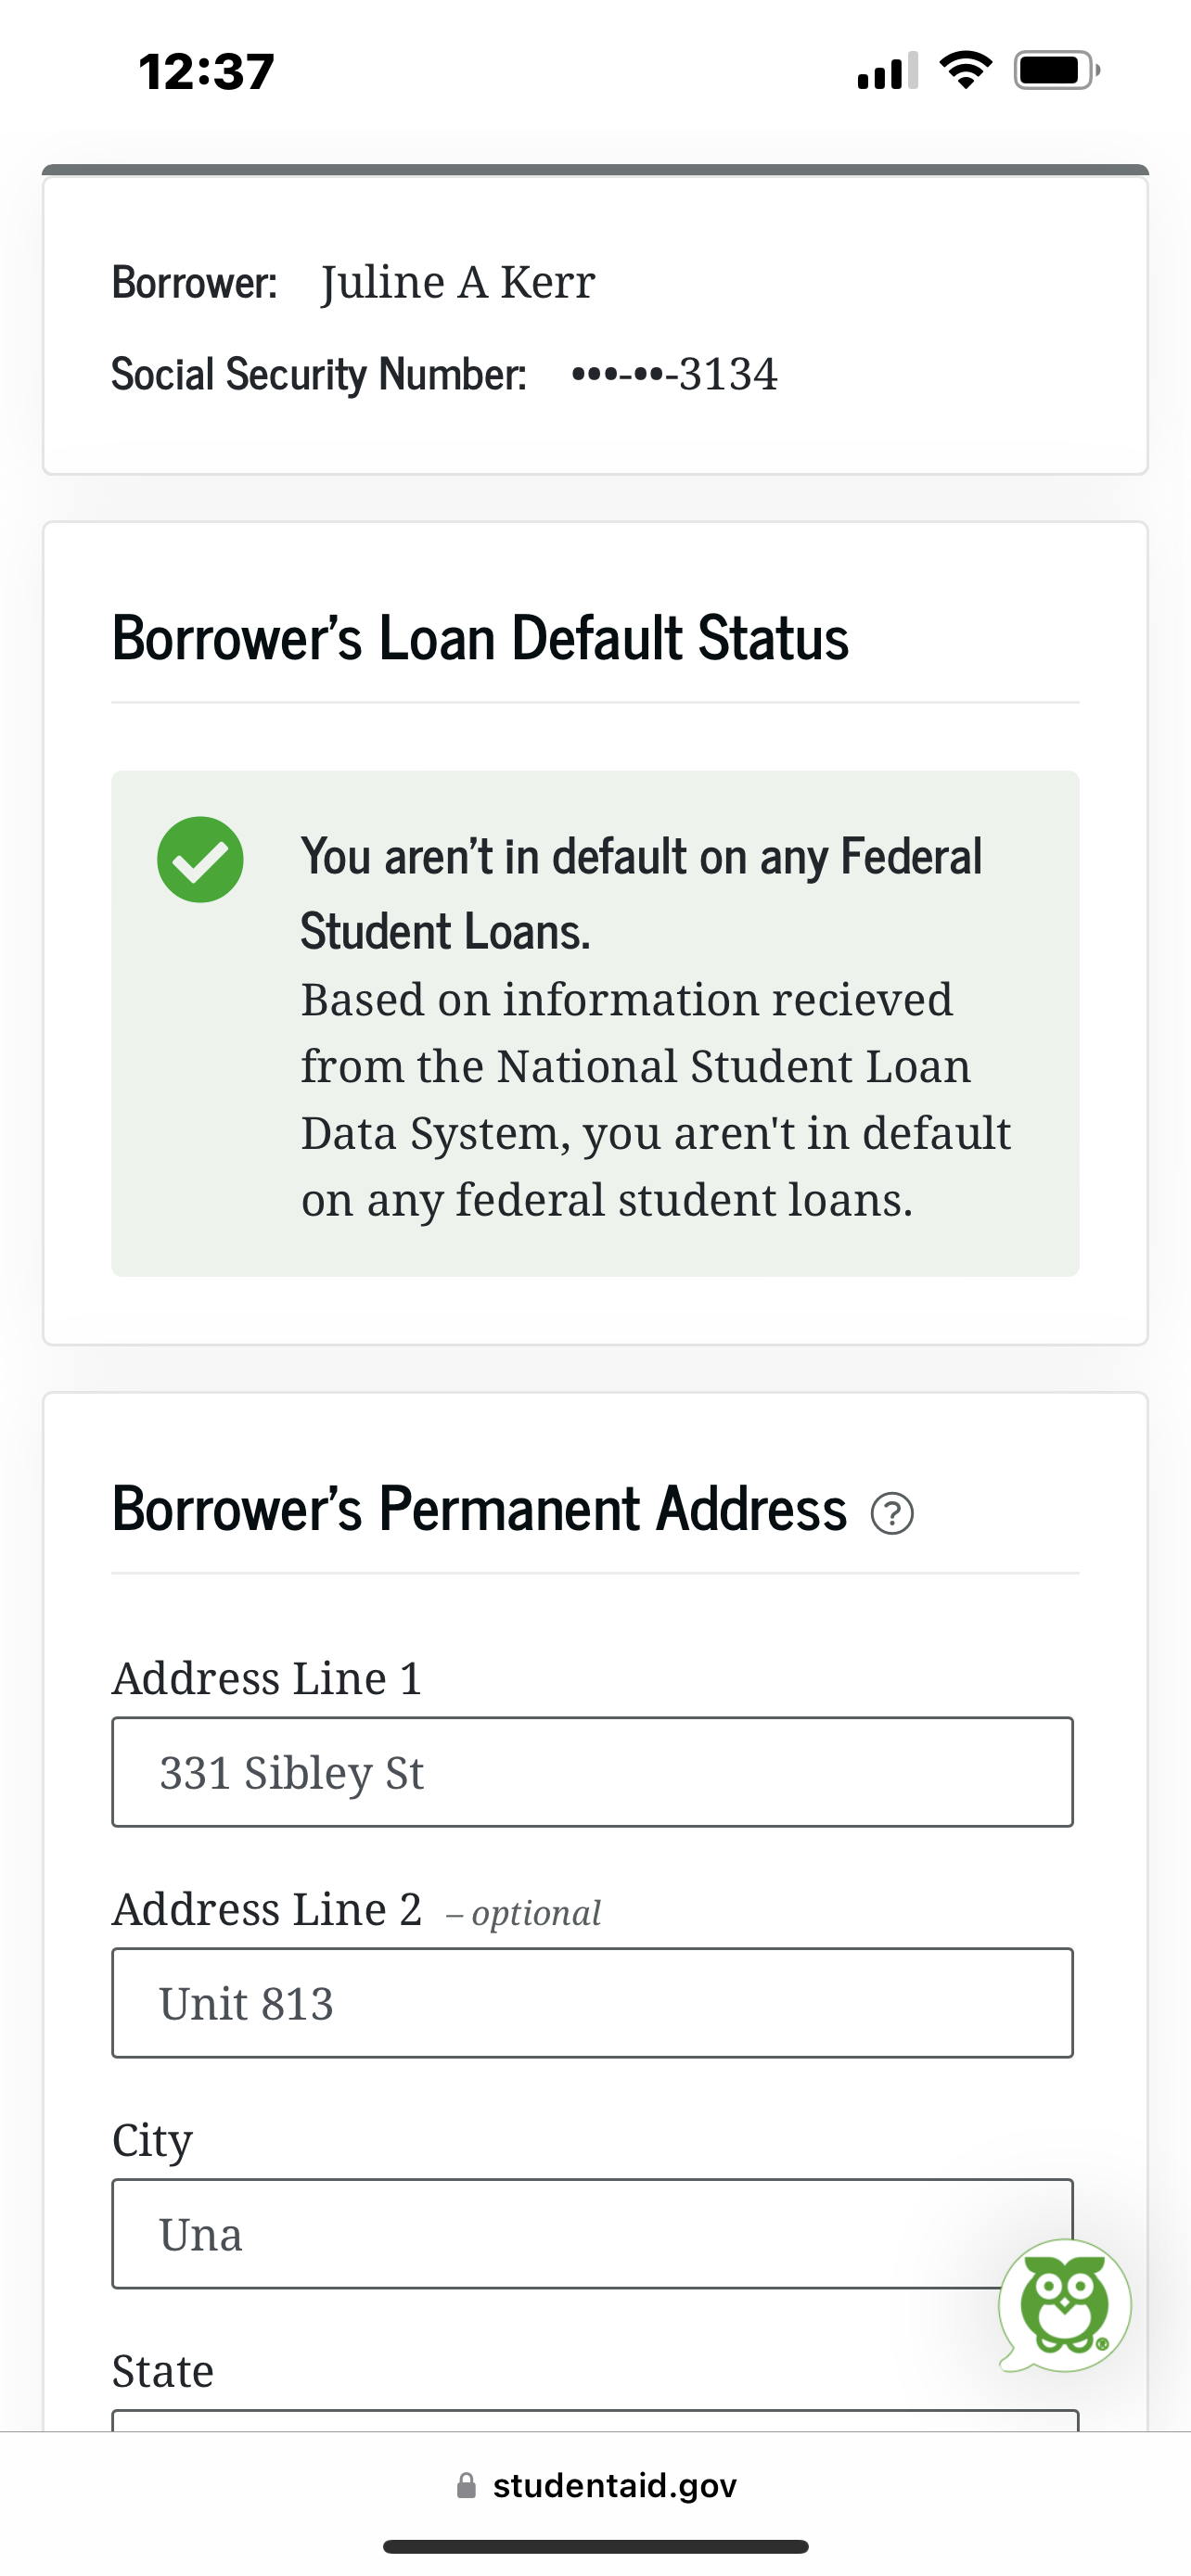 Never defaulted student loan since 2003